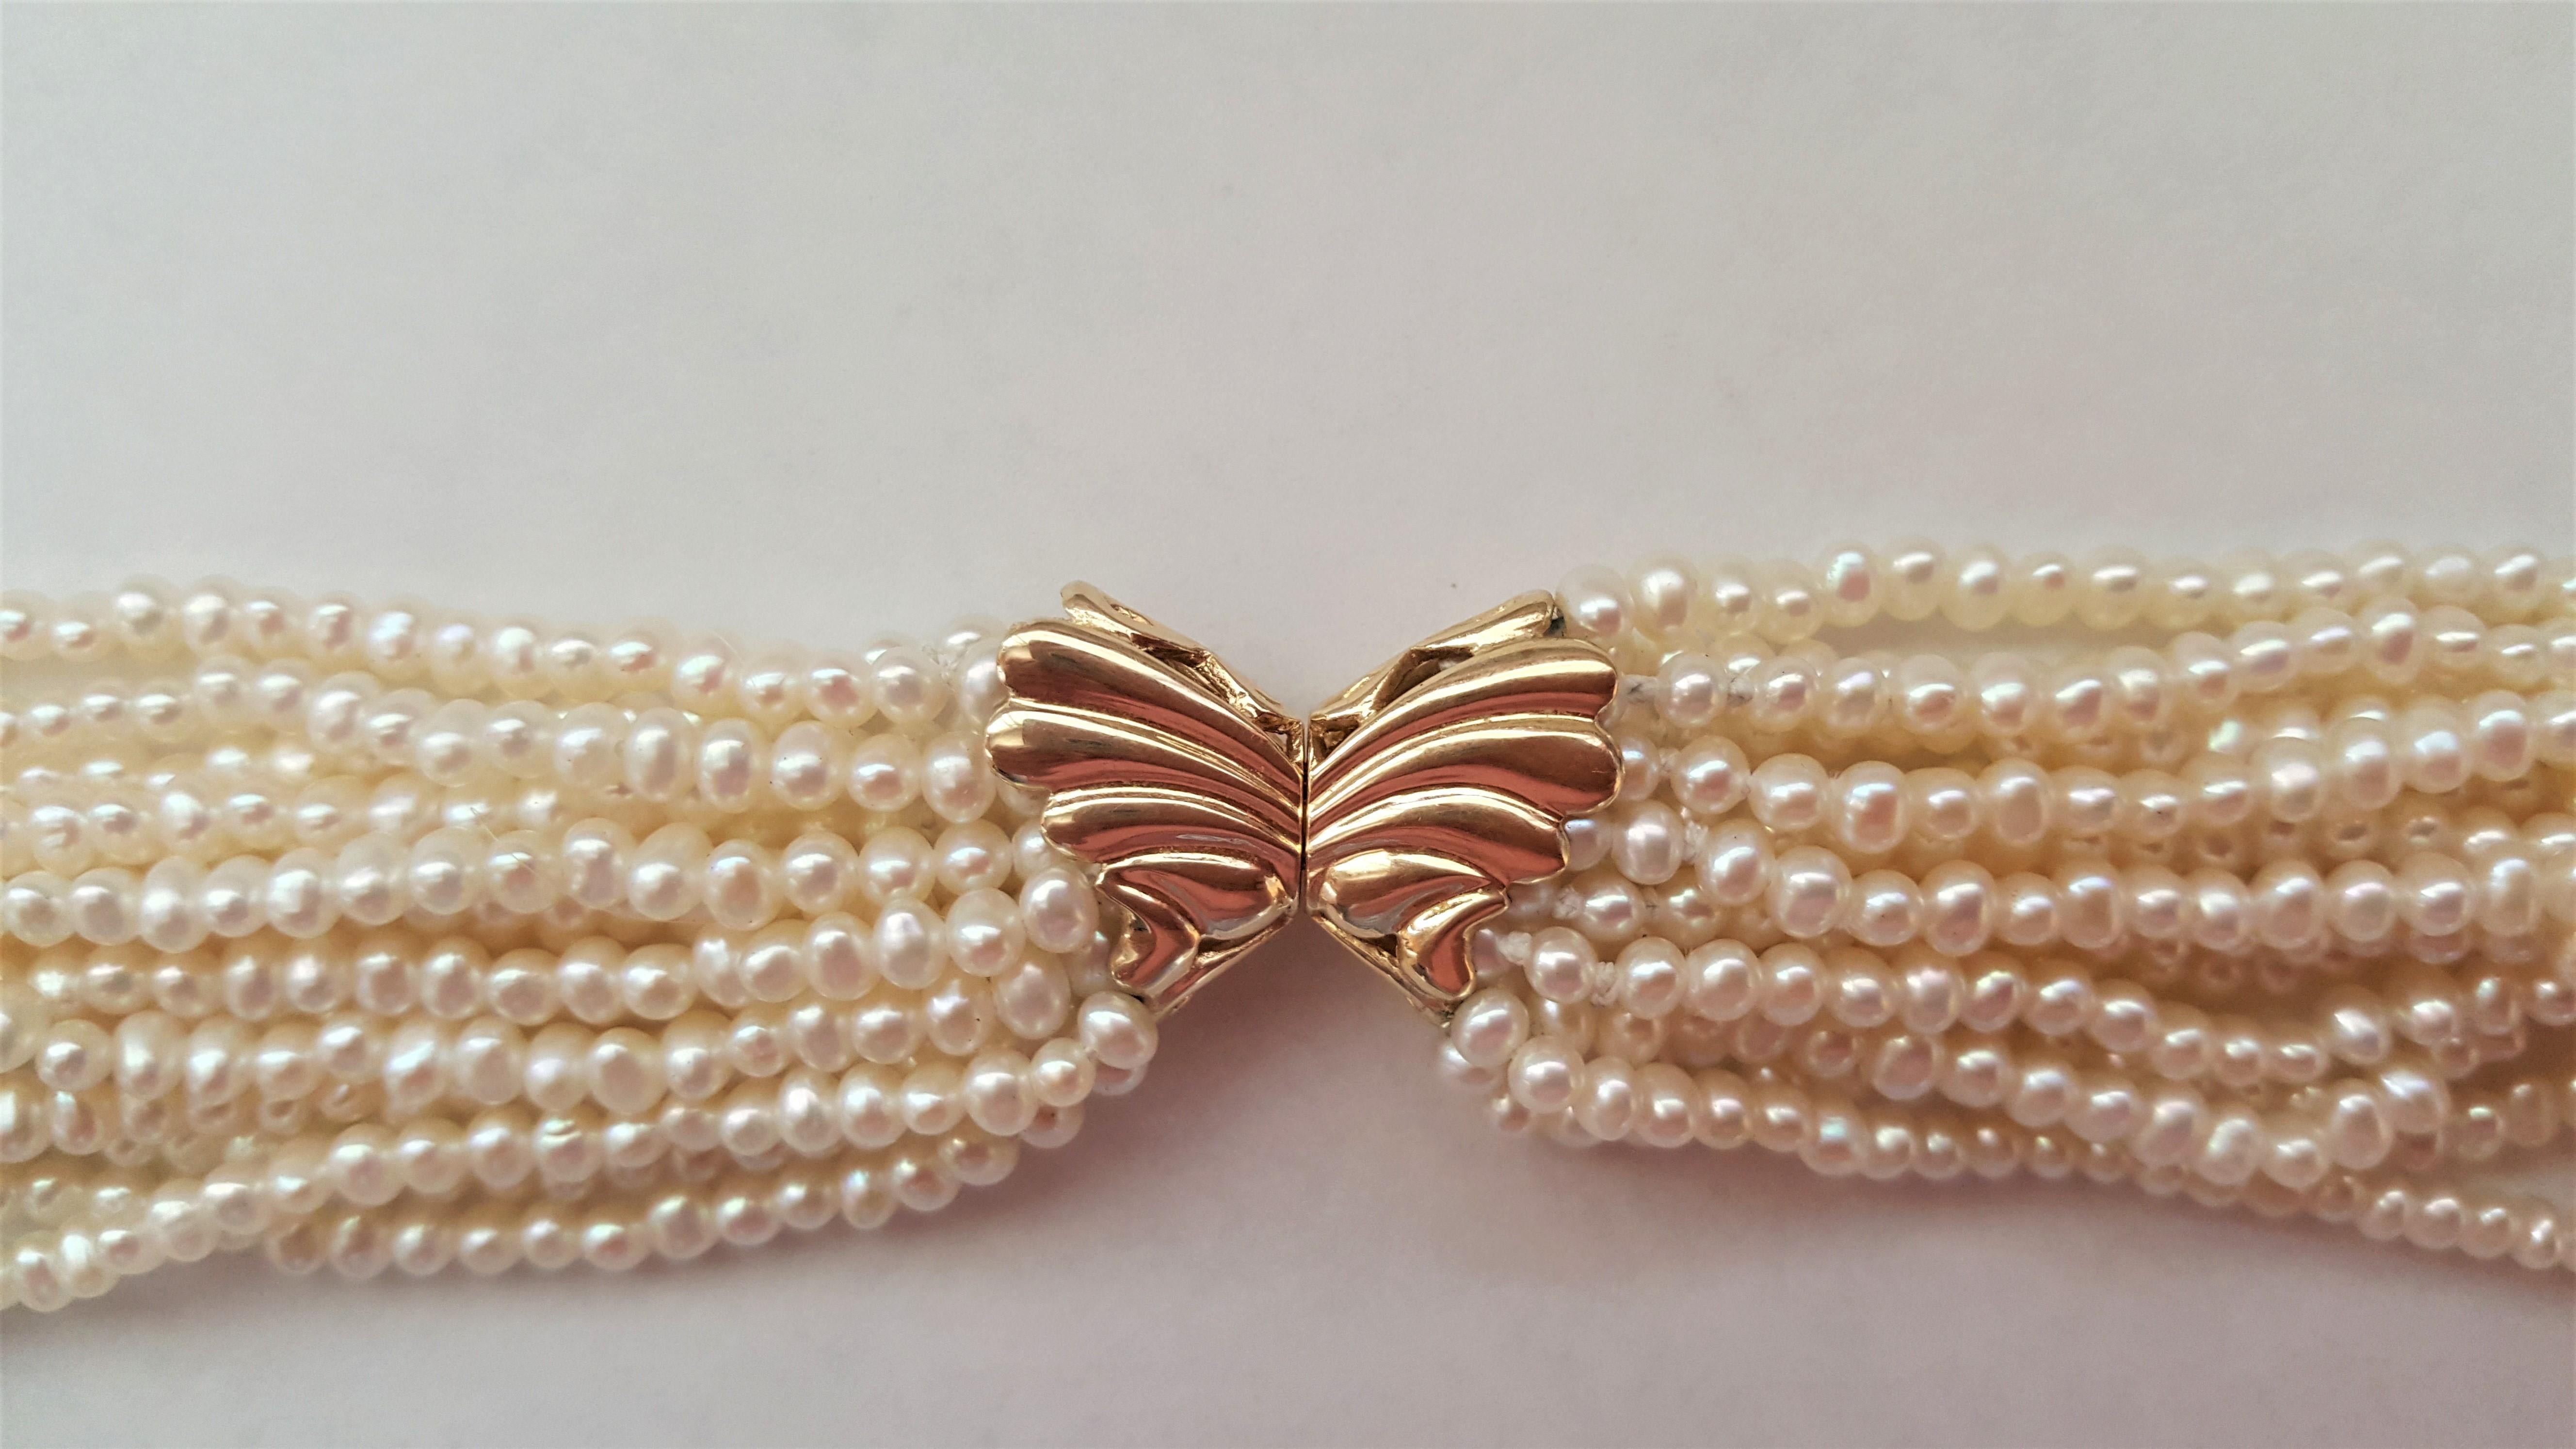 A beautiful 20-inch length multi-strand cream white grade AA pearls that range in size from 2.5-3+ in size. There are 15 strands of pearls that are secured with a 14kt yellow gold butterfly clasp. The clasp is stamped 585 and is 23mm x 11mm in size.